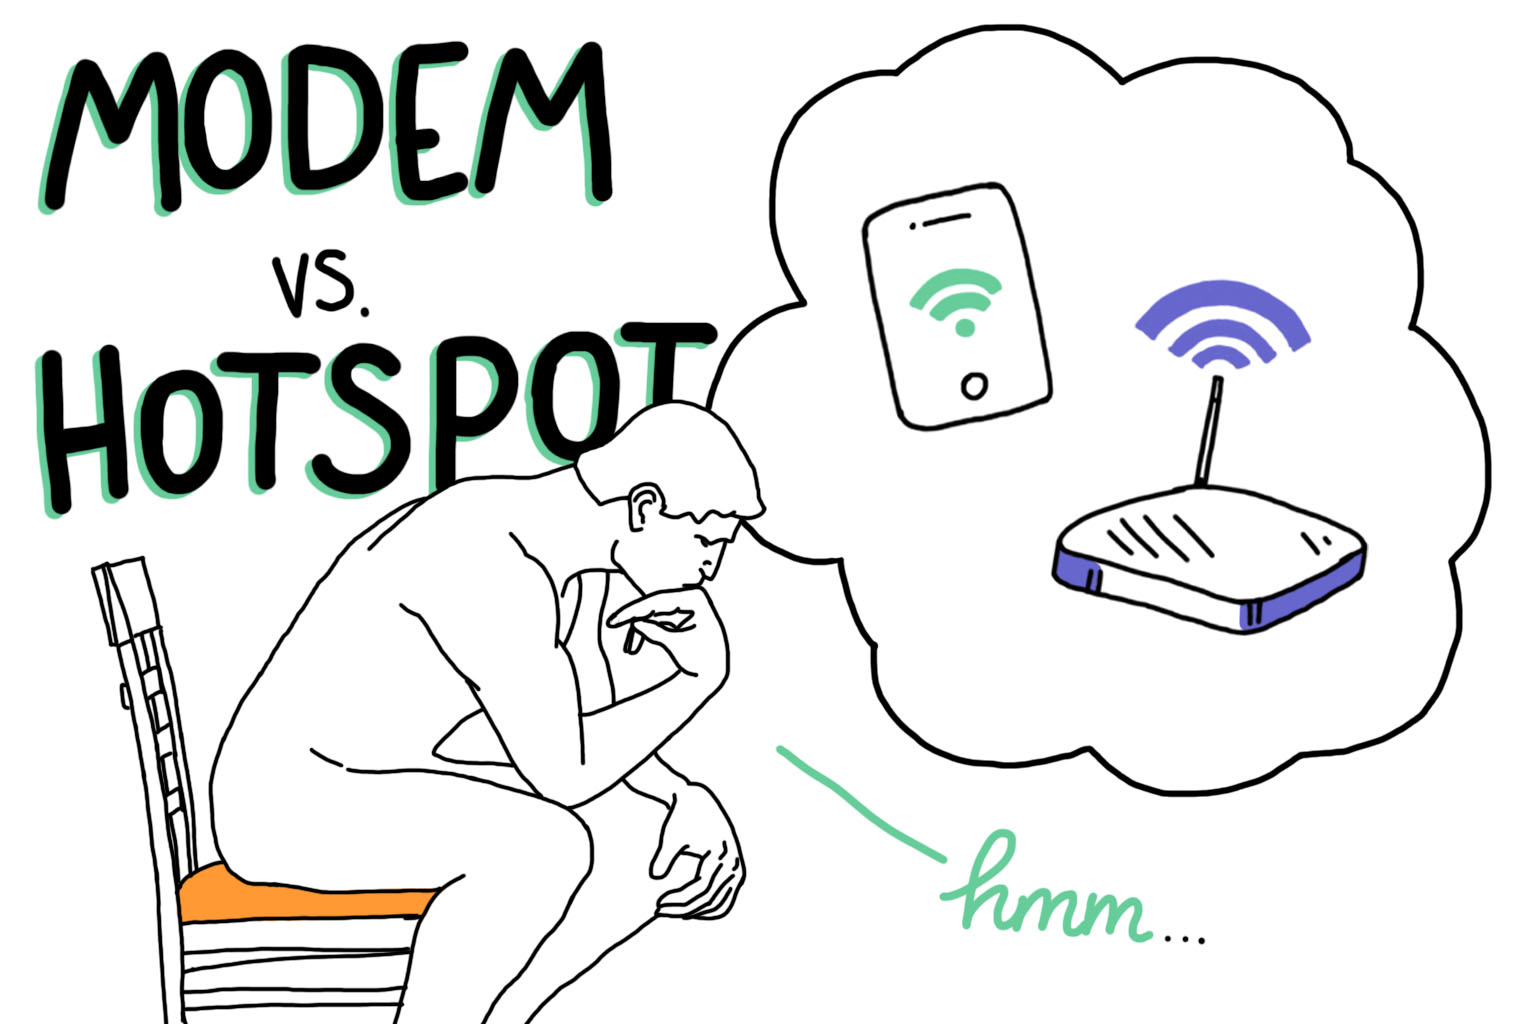 Feed on Crack pot St Hotspot vs Modem: Which is the Best? [Infographic]